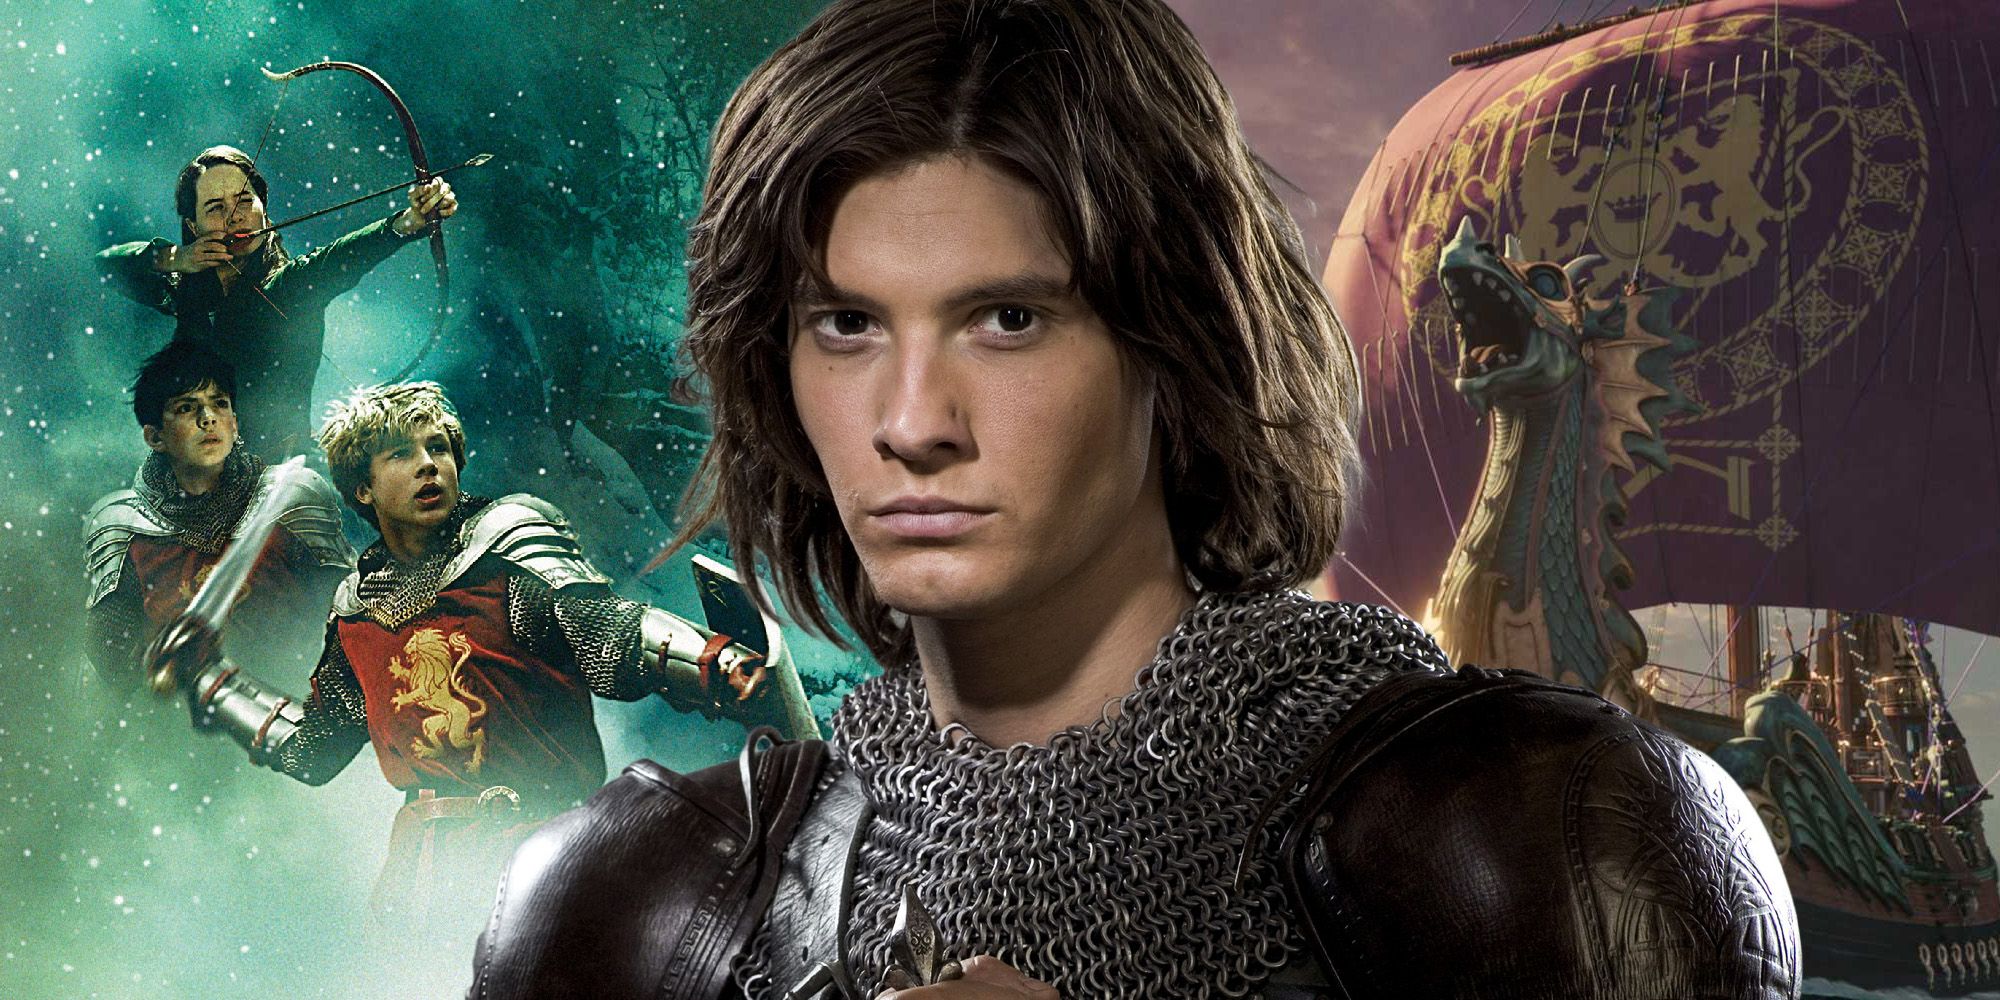 film the chronicles of narnia prince caspian